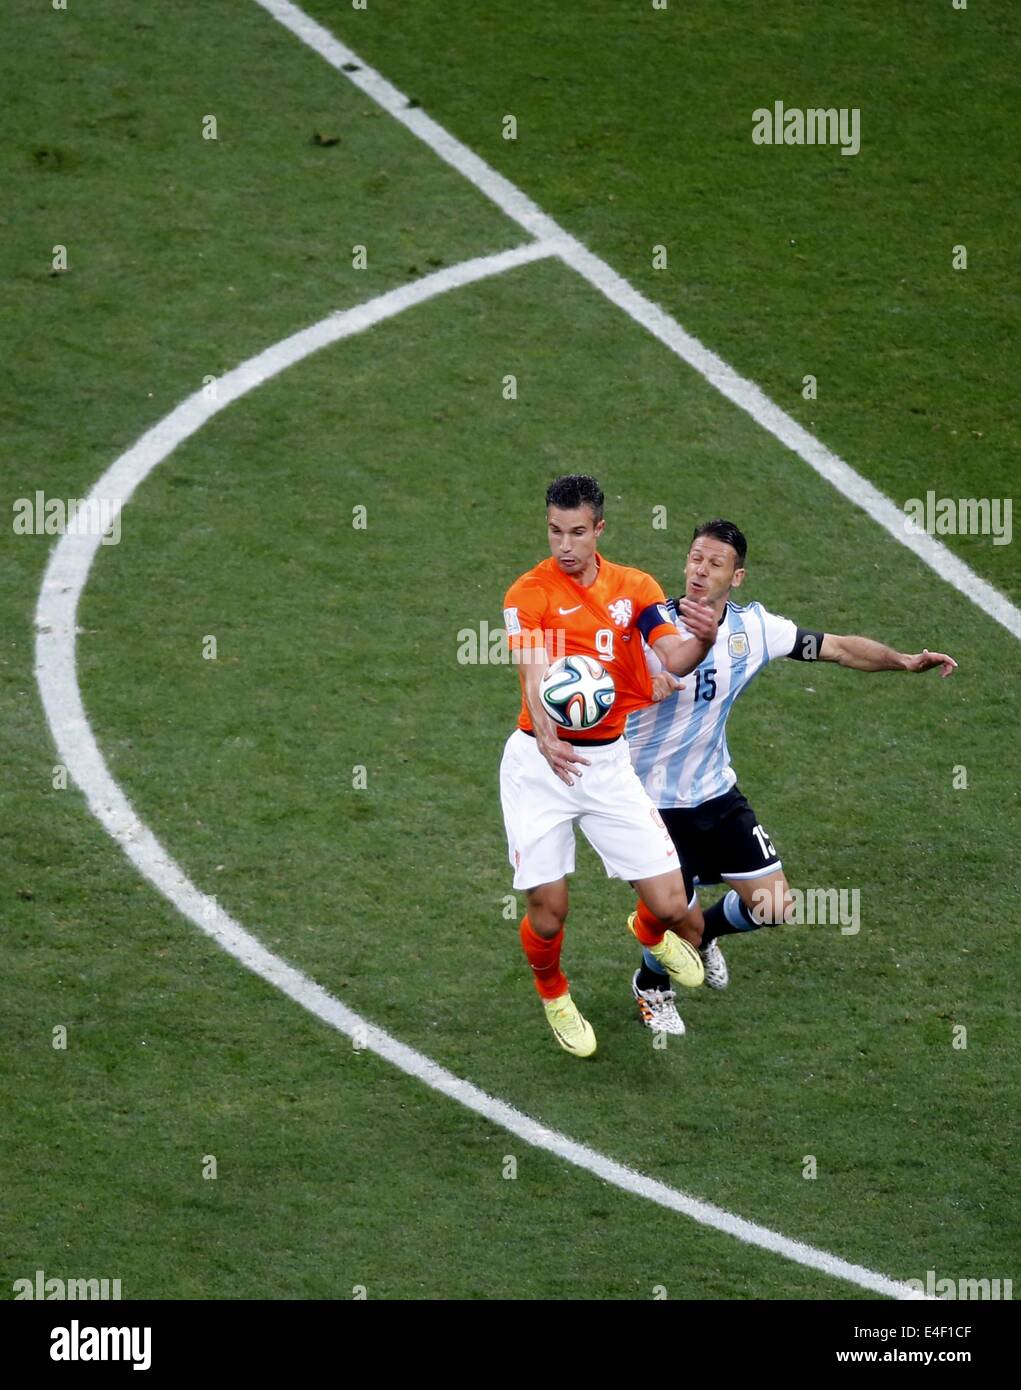 Sao Paulo, Brazil. 9th July, 2014. Netherlands' Robin van Persie vies with Argentina's Martin Demichelis during a semifinal match between Netherlands and Argentina of 2014 FIFA World Cup at the Arena de Sao Paulo Stadium in Sao Paulo, Brazil, on July 9, 2014. Credit:  Liao Yujie/Xinhua/Alamy Live News Stock Photo